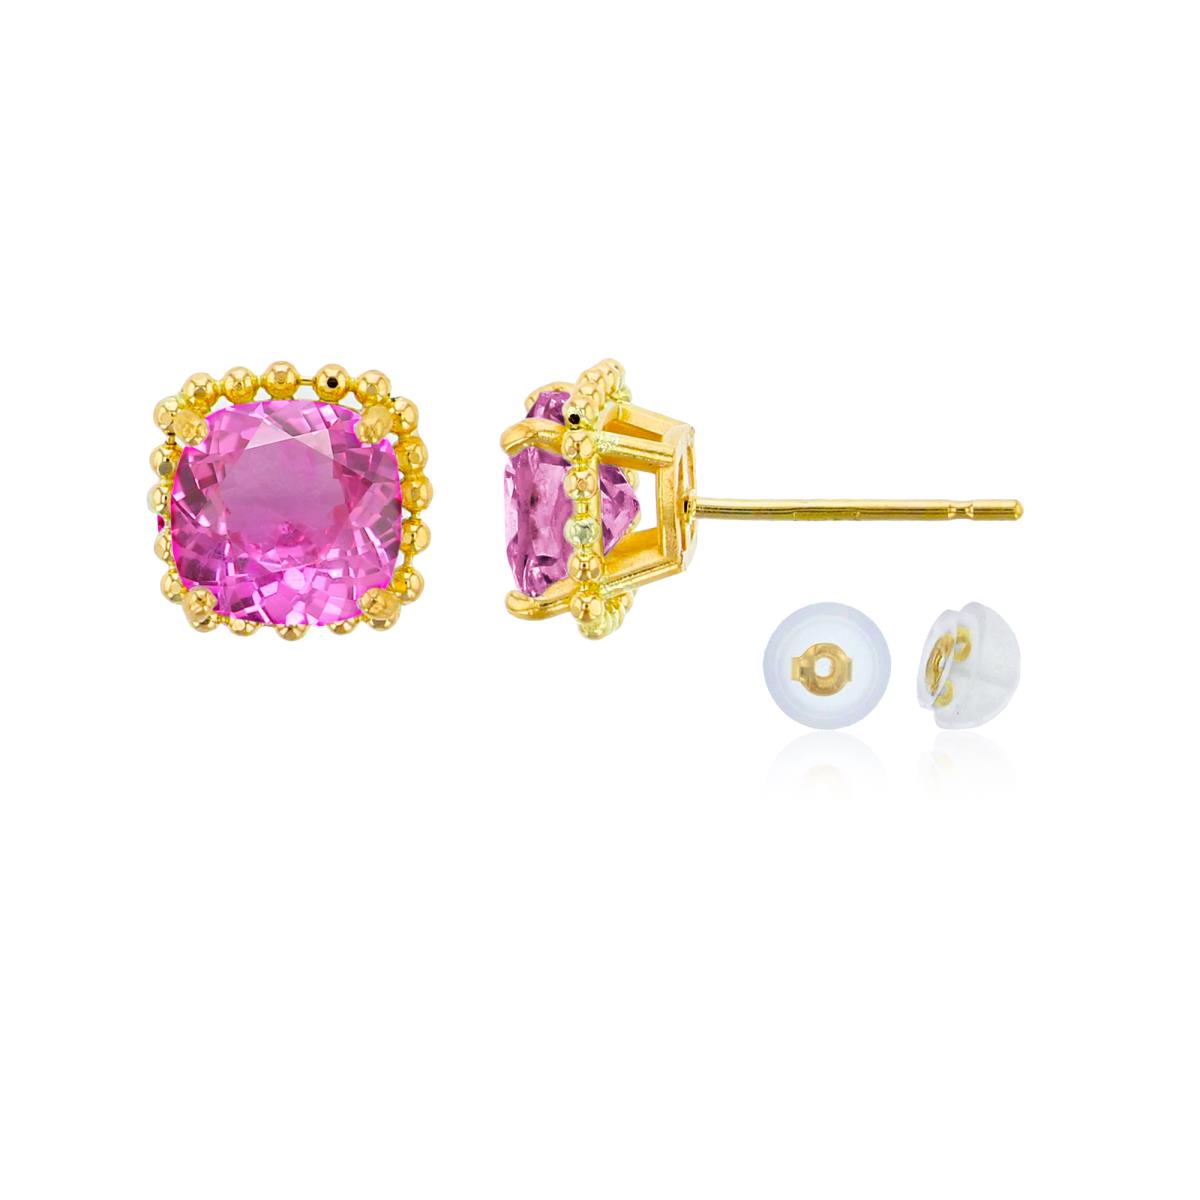 14K Yellow Gold 6x6mm Cushion Cut Created Pink Sapphire Bead Frame Stud Earring with Silicone Back